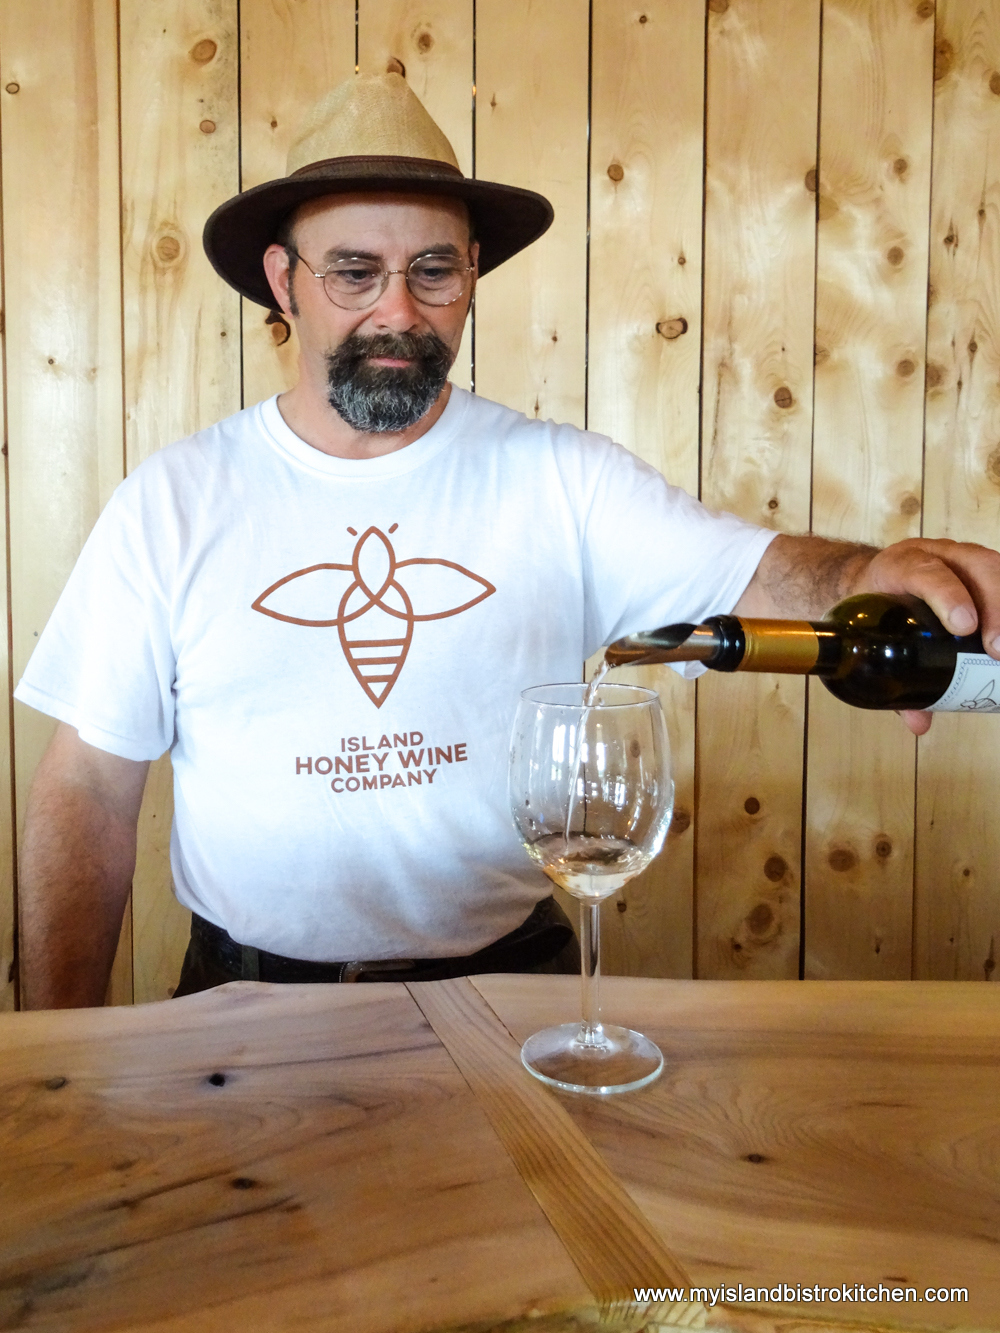 Charles Lipnicki pours a sample of one of his honey meads made at Island Honey Wine Company in Wheatley River, PEI